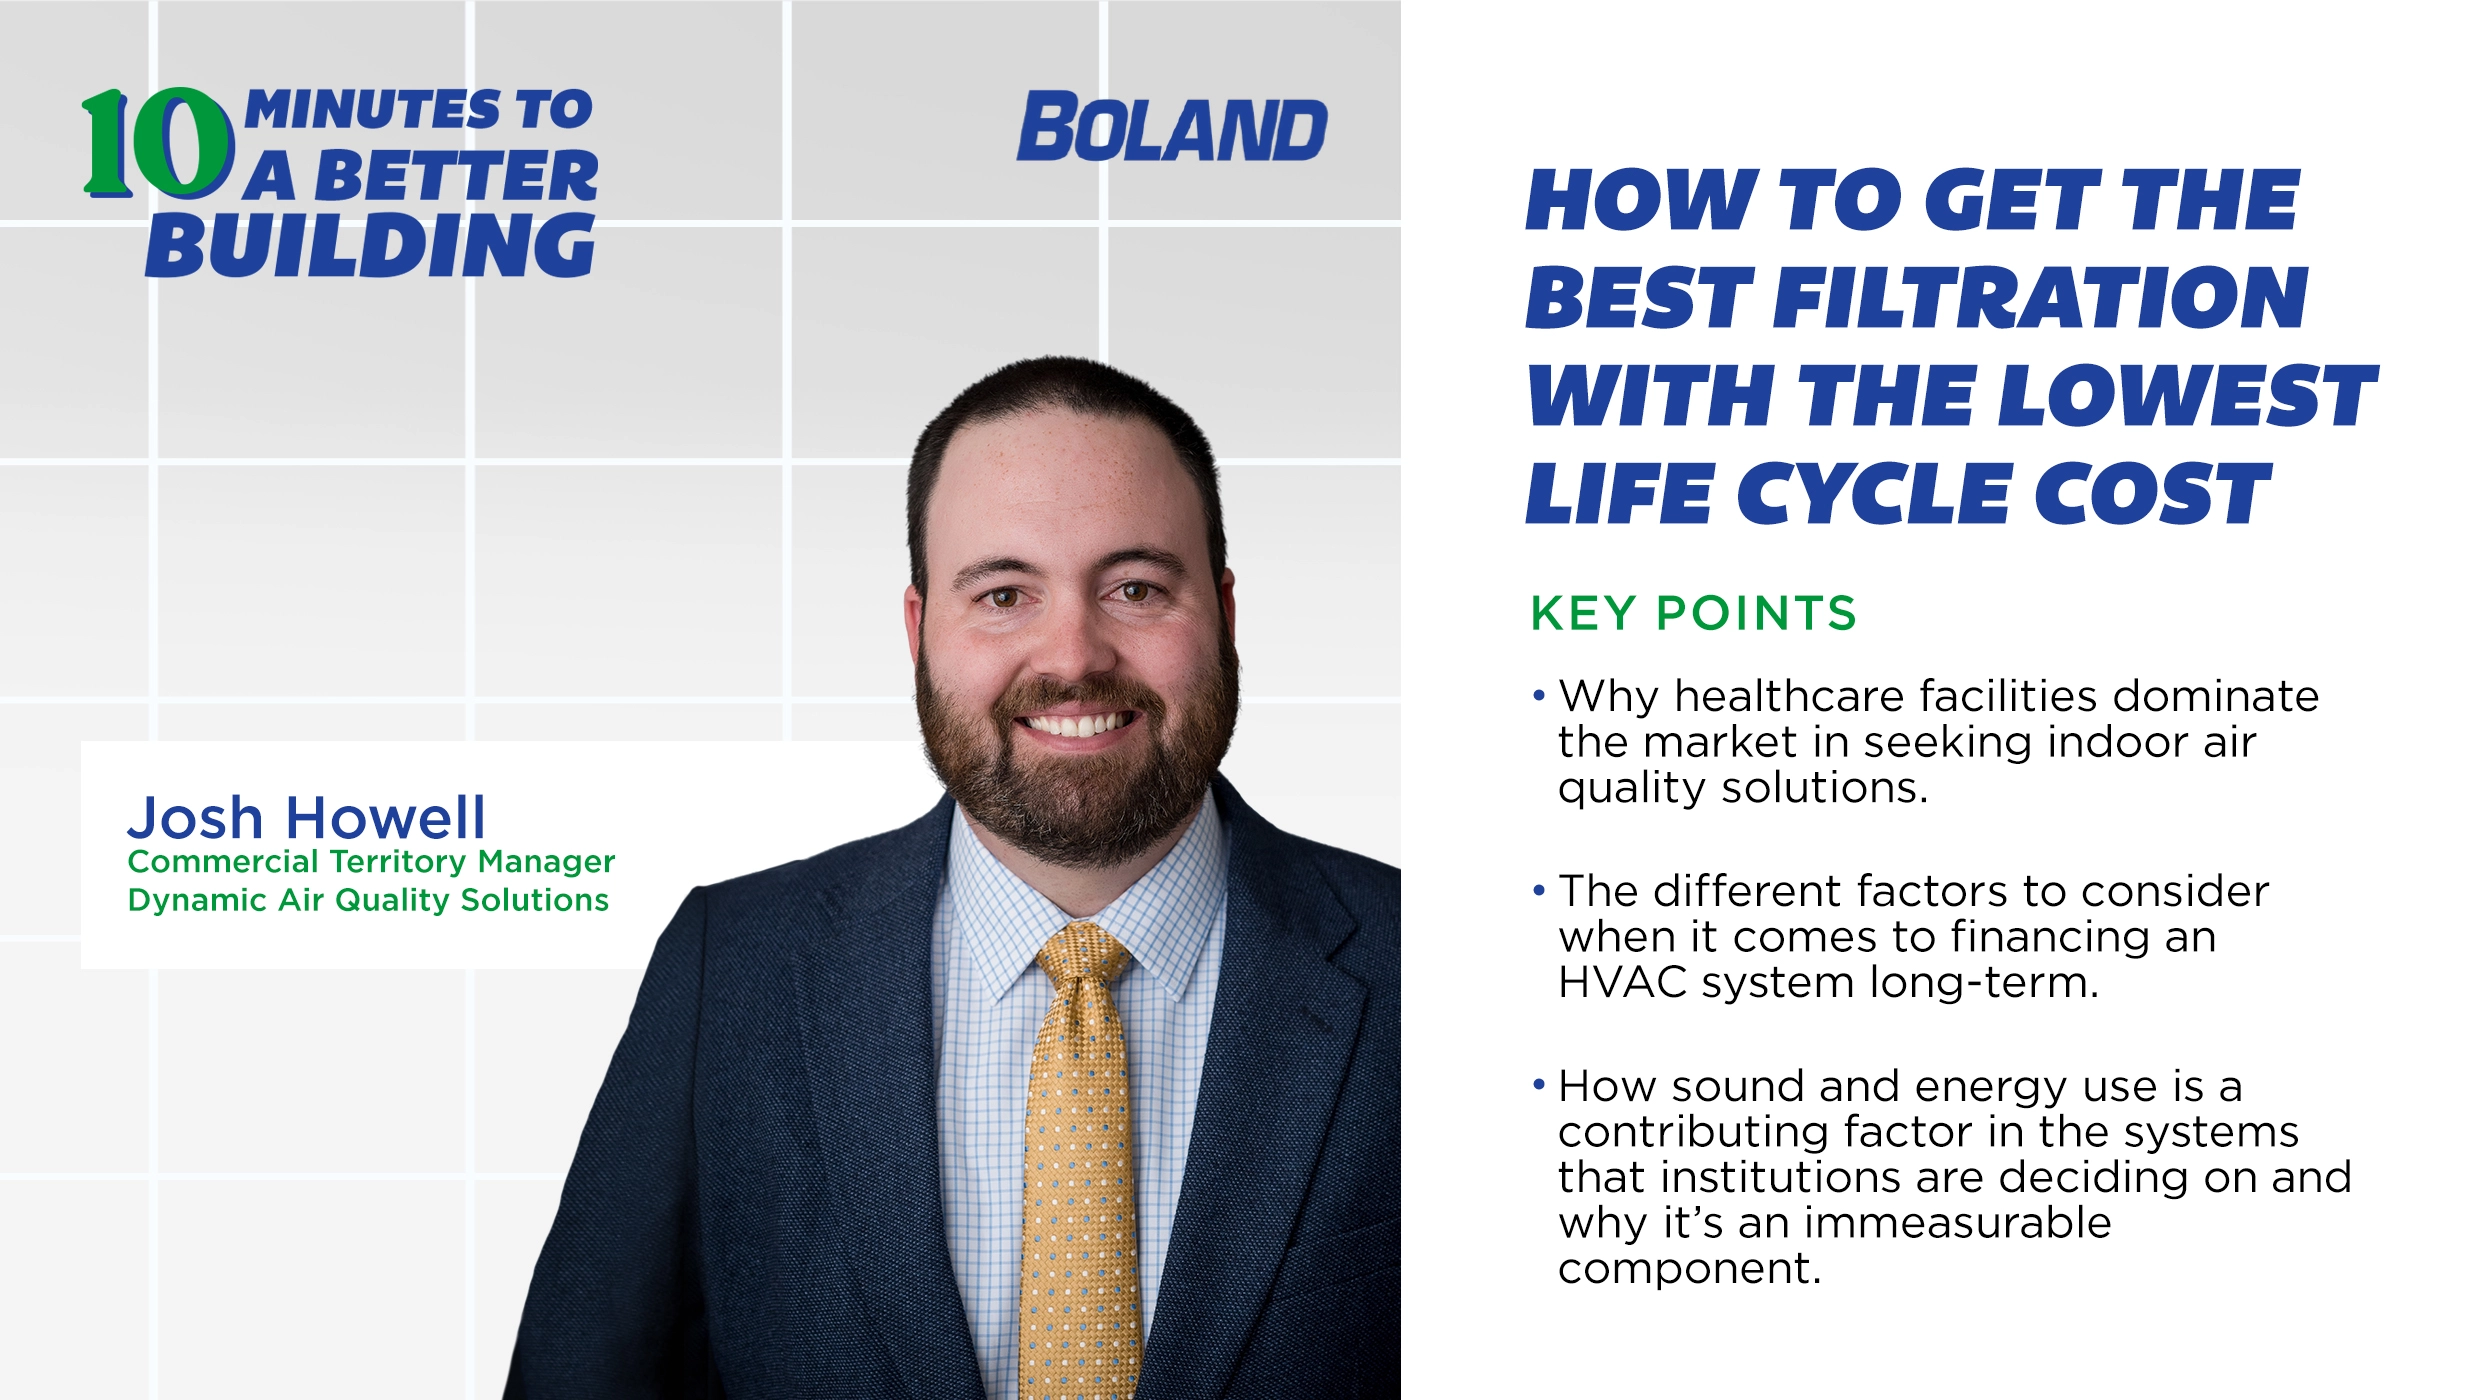 How to Get the Best Filtration With the Lowest Life Cycle Cost